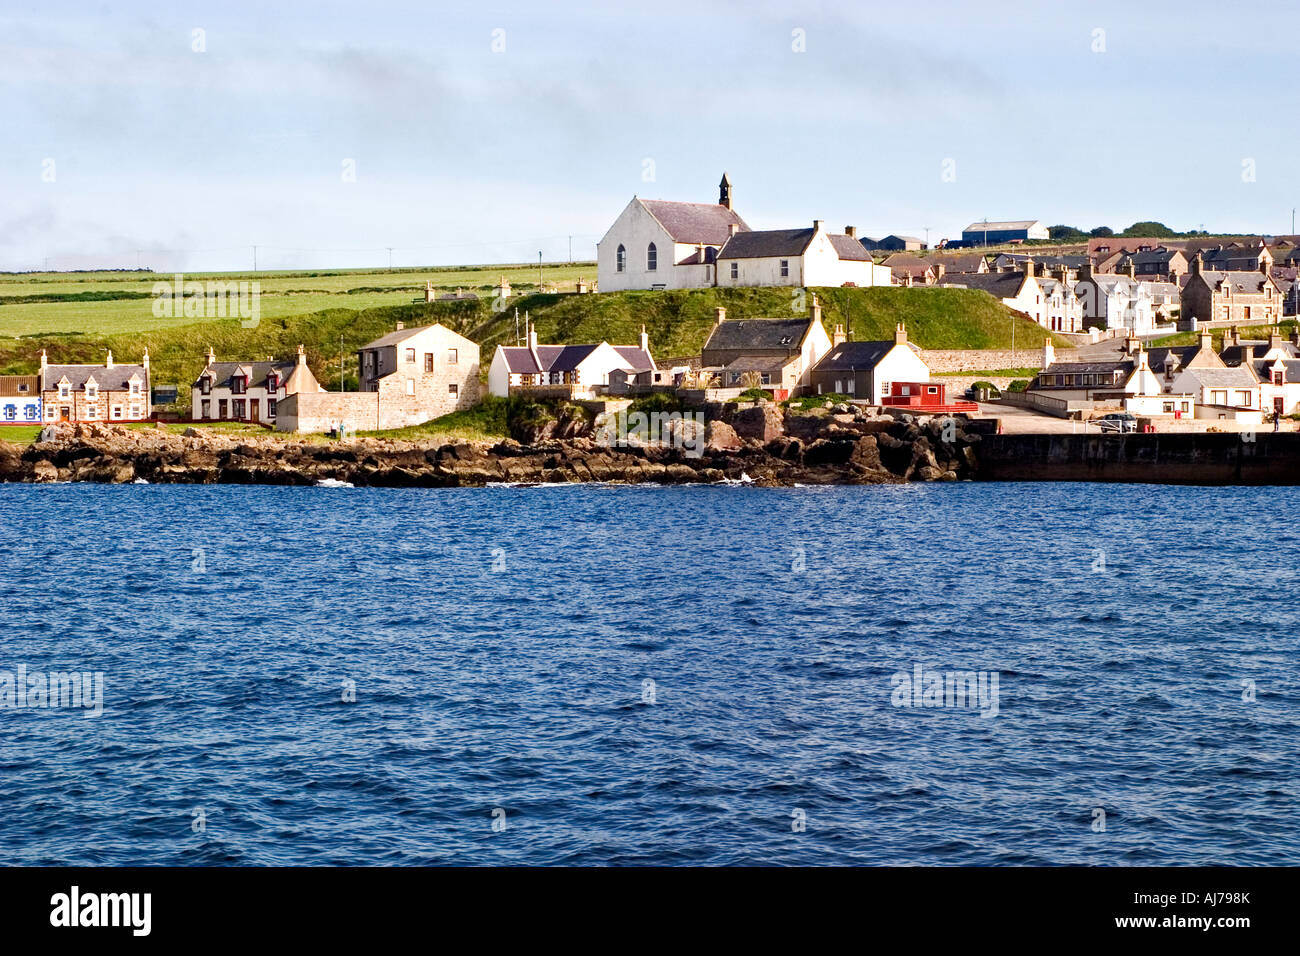 The picturesque village of Findochty as seen from a boat on the Moray Firth, Scotland. Stock Photo